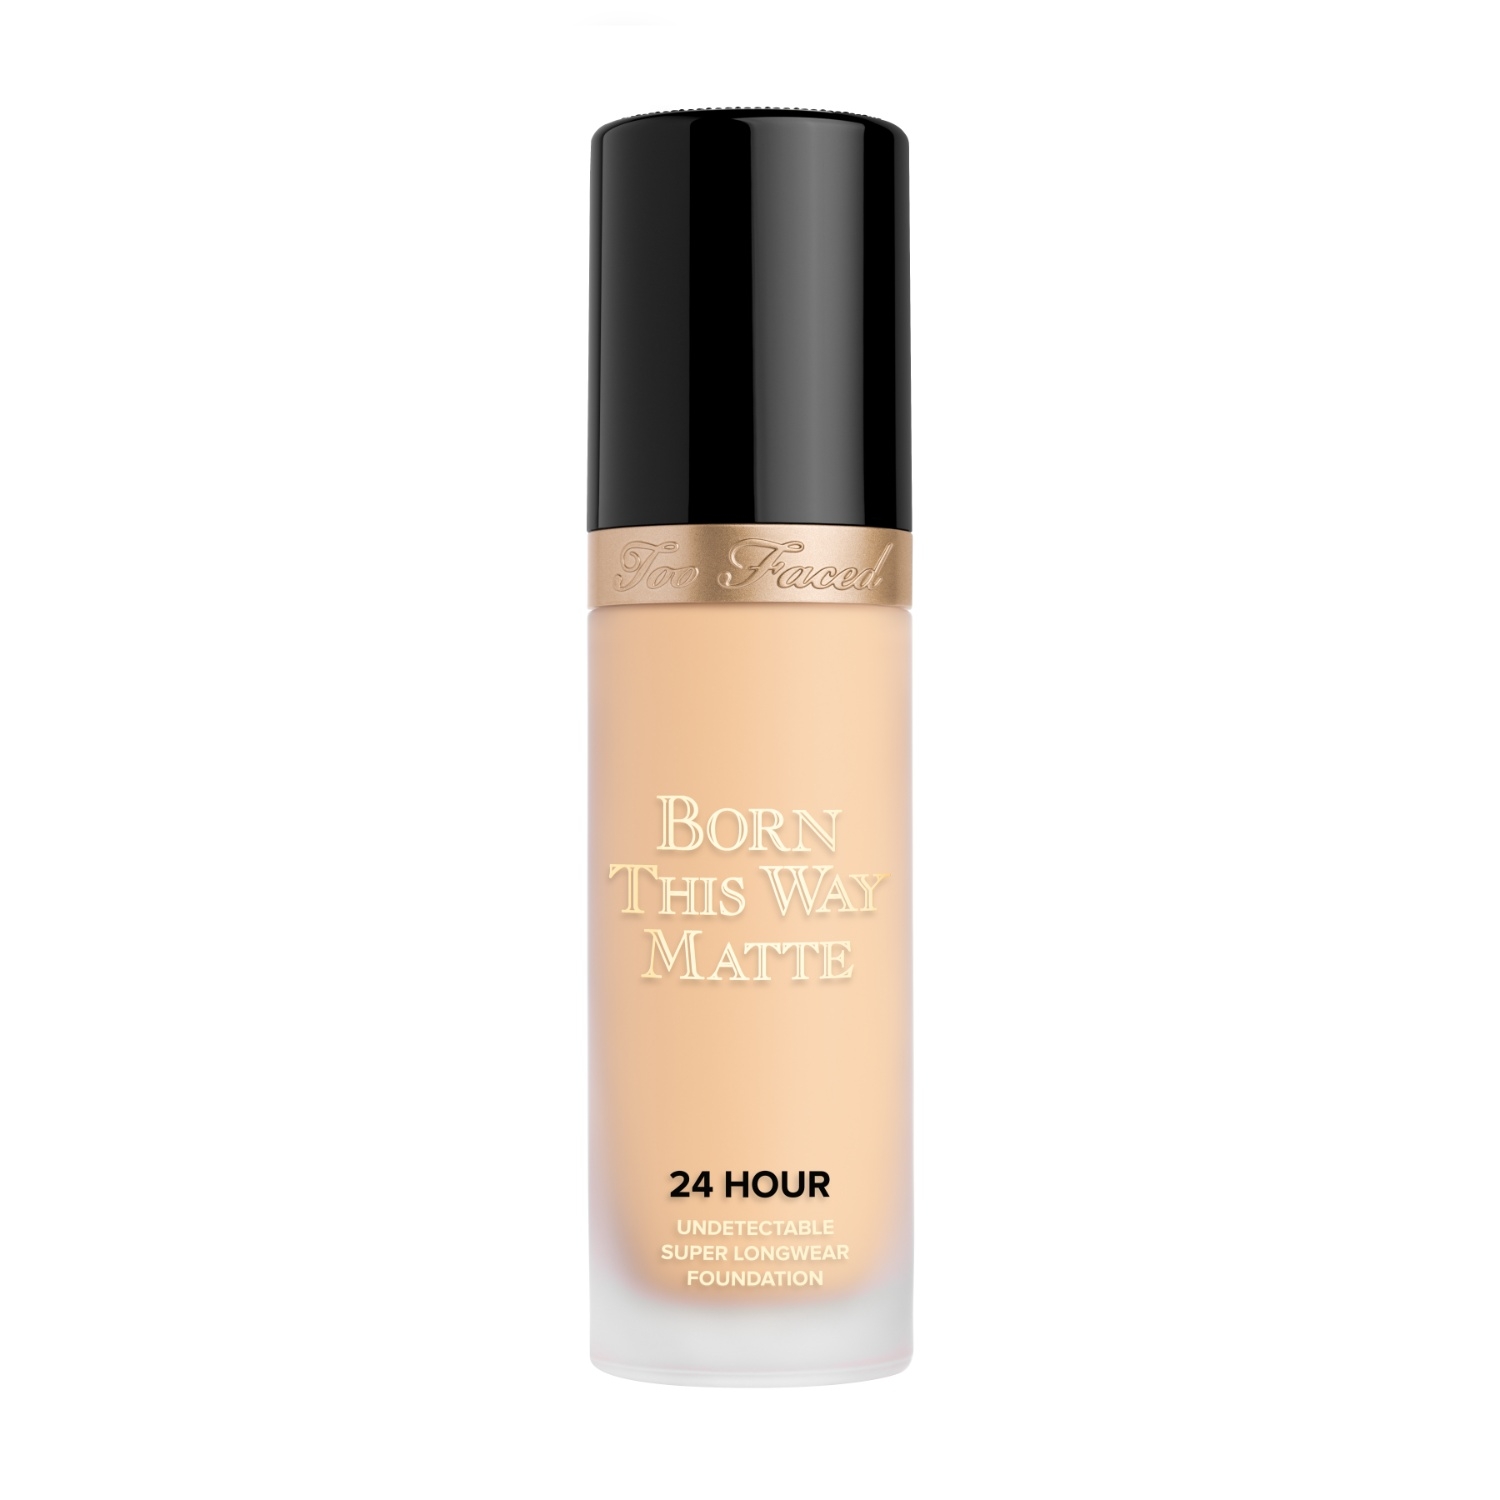 Too Faced | Too Faced Born This Way 24-Hour Longwear Matte Foundation - Almond (30ml)